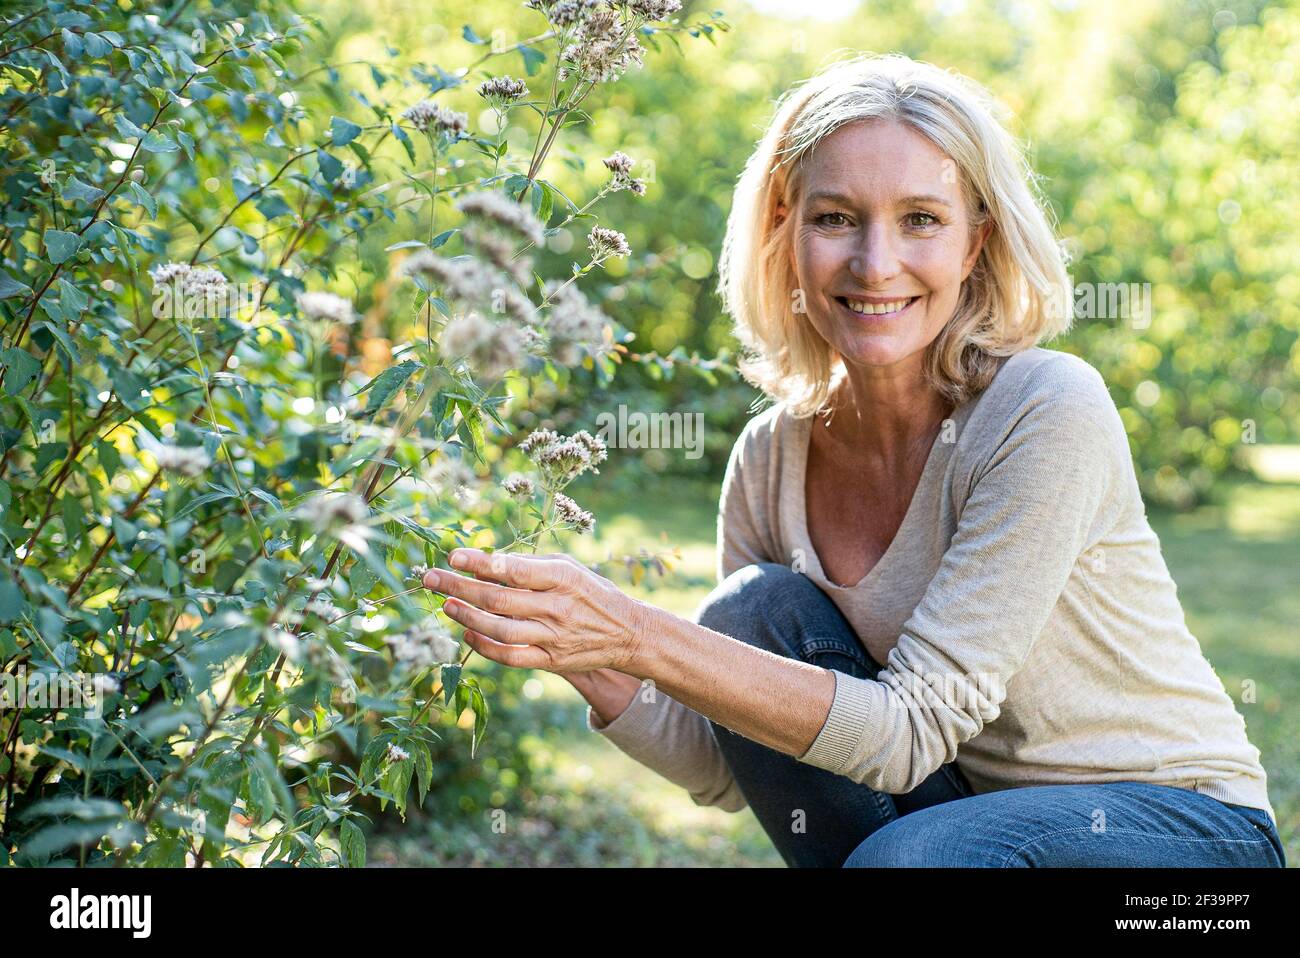 Portrait of smiling mature woman touching plant in backyard Stock Photo